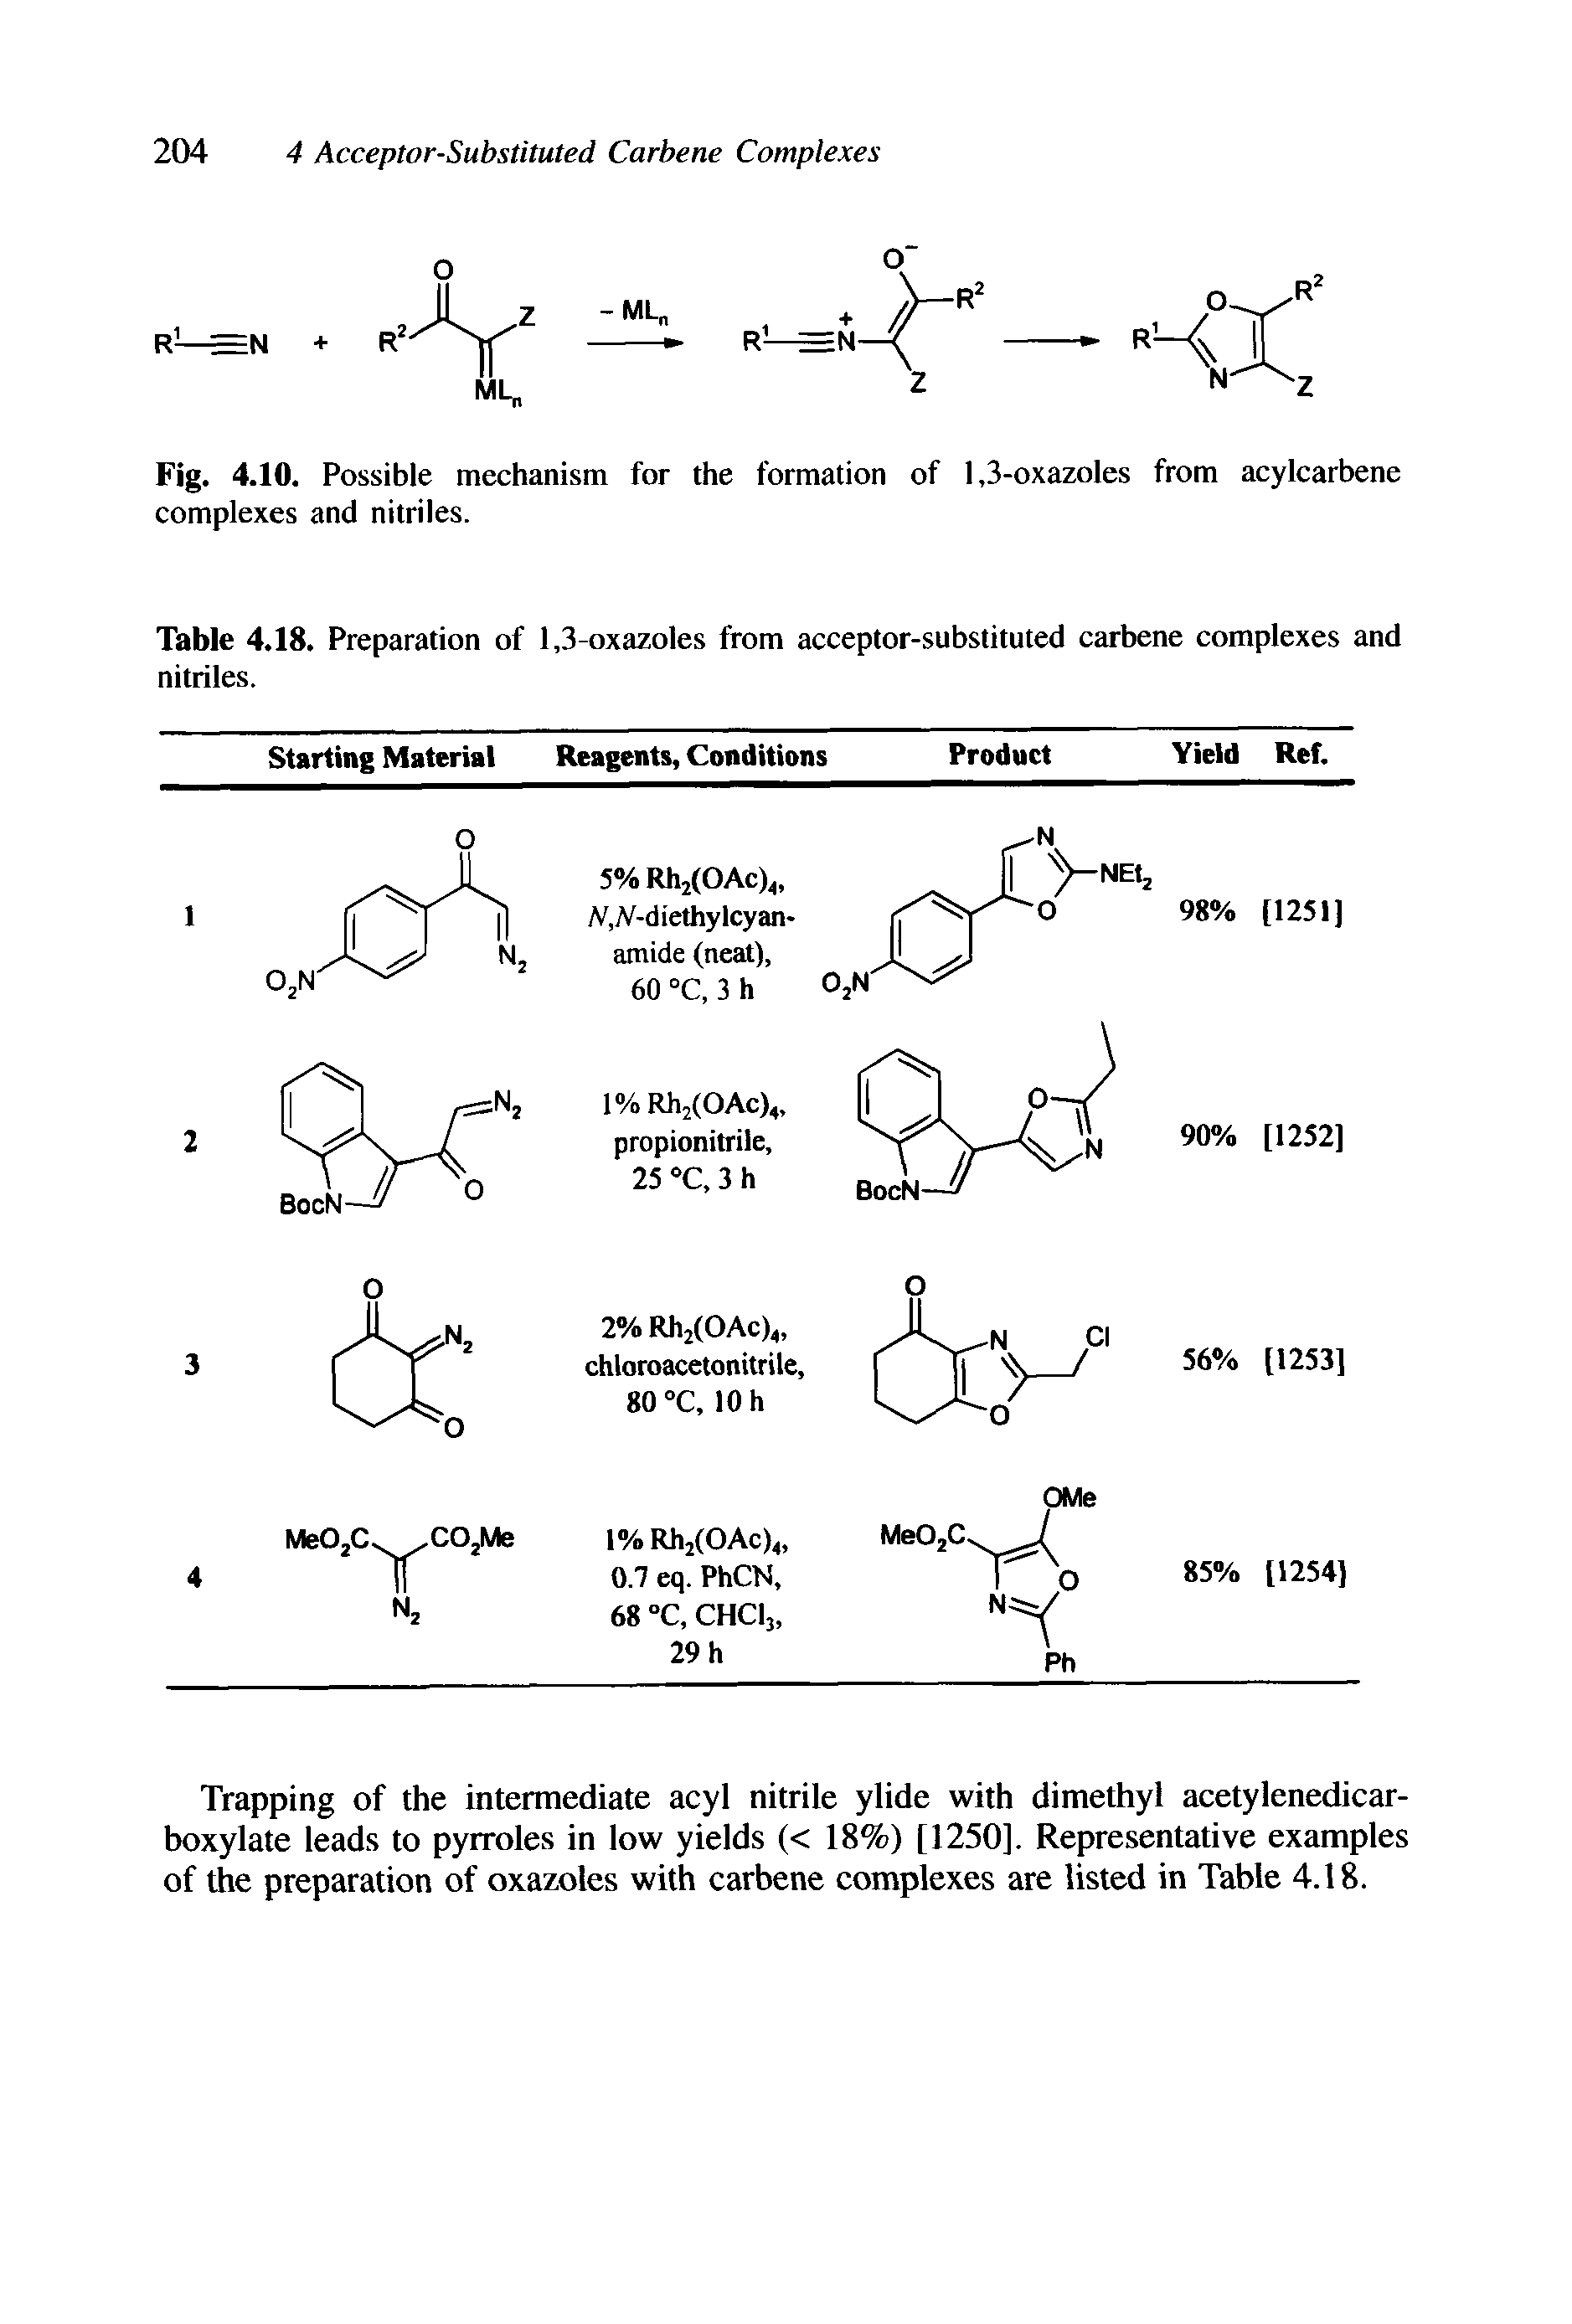 Fig. 4.10. Possible mechanism for the formation of 1,3-oxazoles from acylcarbene complexes and nitriles.